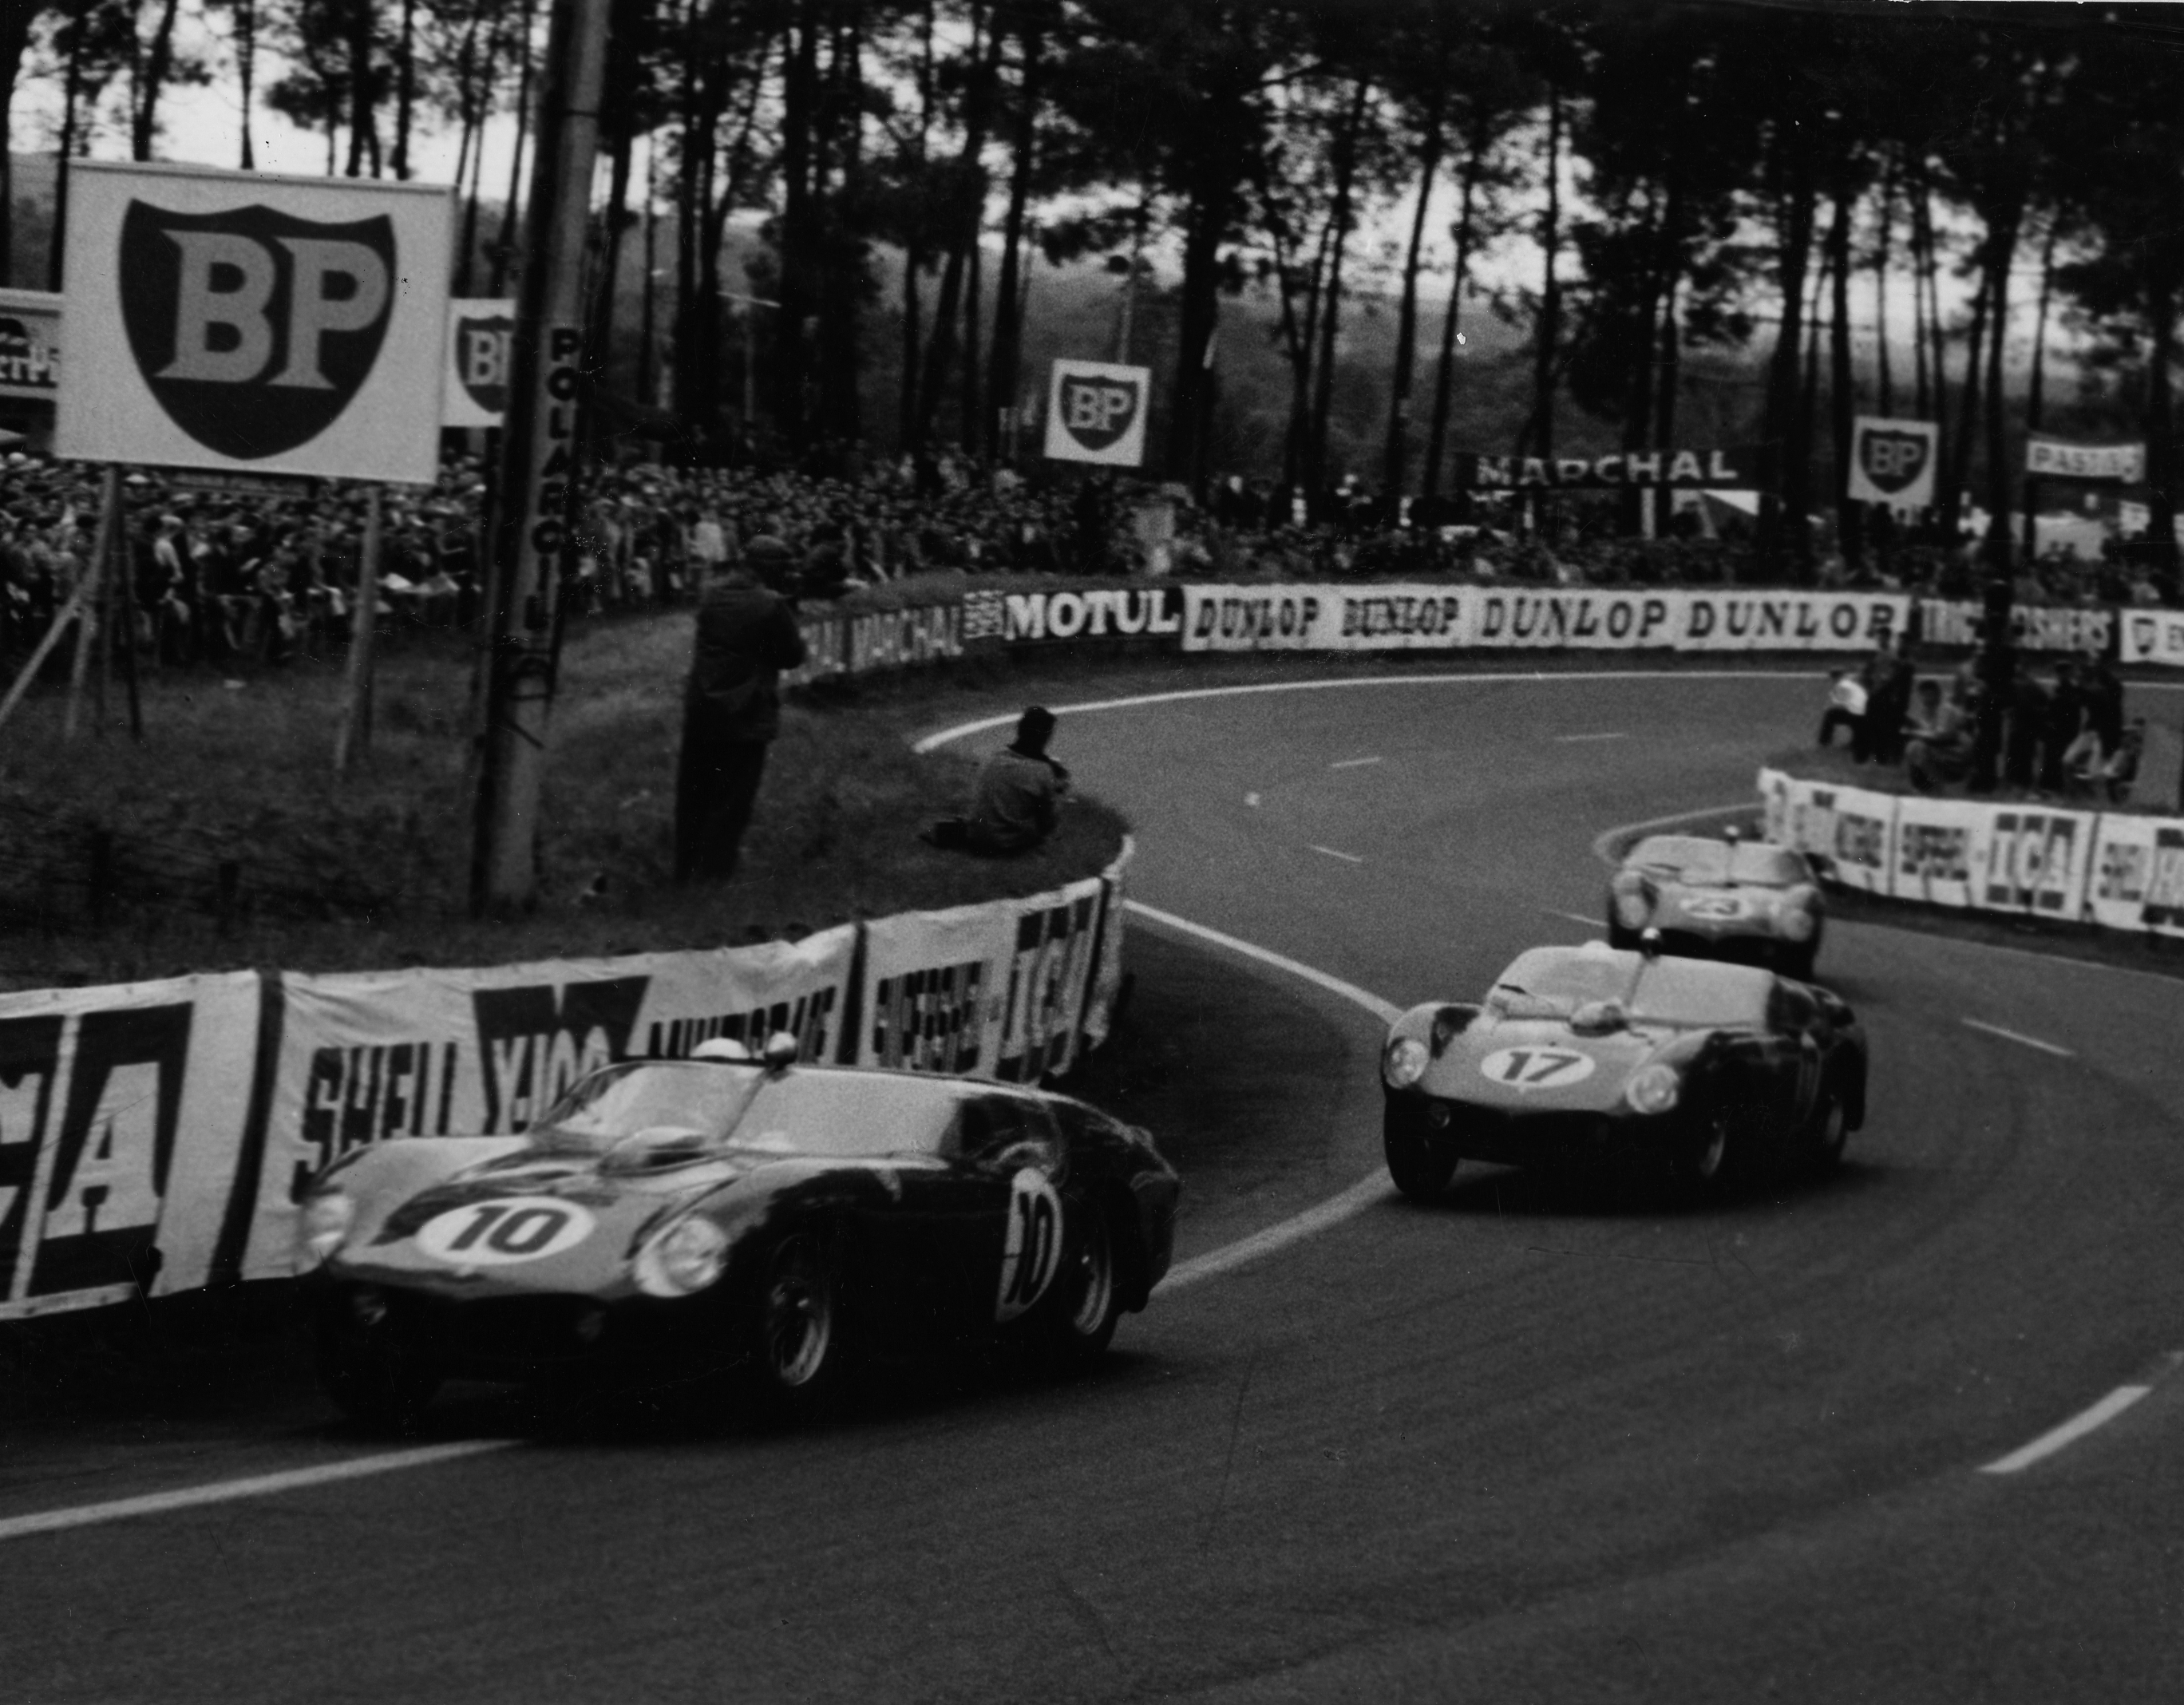 The #10 TRI/61 of Gendebien/Hill just ahead of the NART's TRI/61 driven by brothers Ricardo et Pedro Rodríguez in the fight until retiring. The official #23 Ferrari 246SP of von Trips/Ginther.